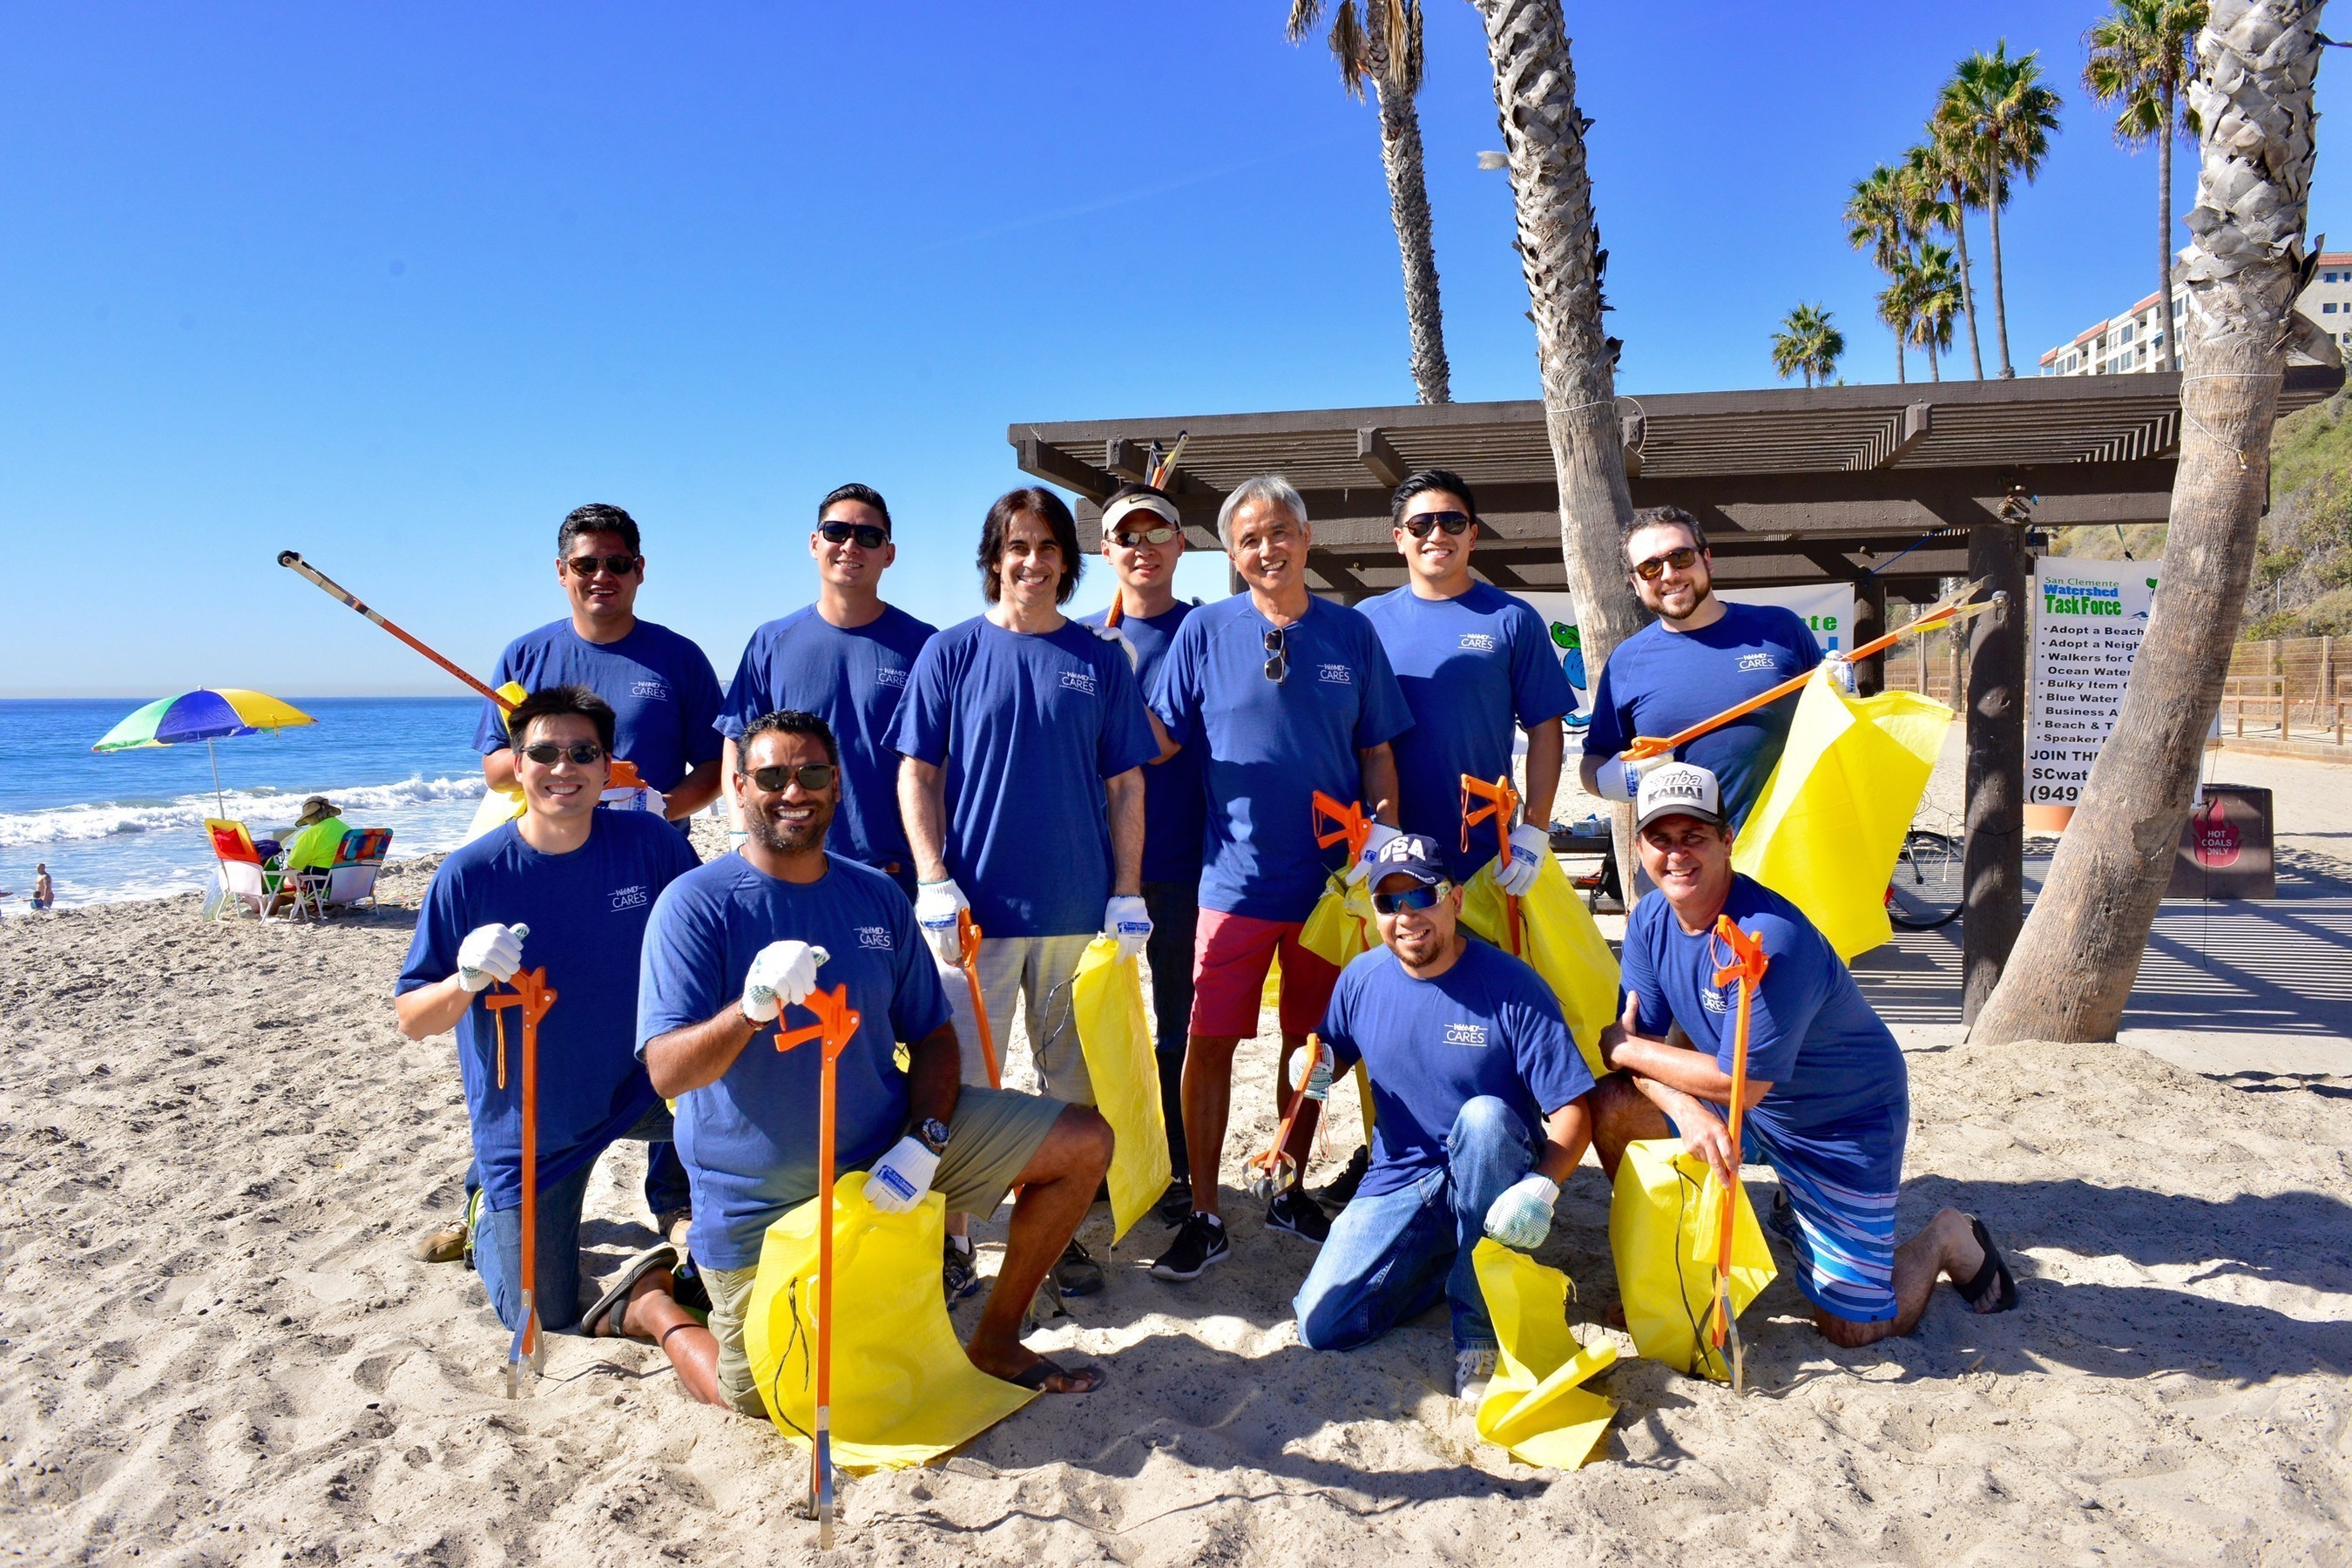 WebMD Cares Impact Day 2016 - Employees worked with the San Clemente Watershed Task Force to clean up the beach.